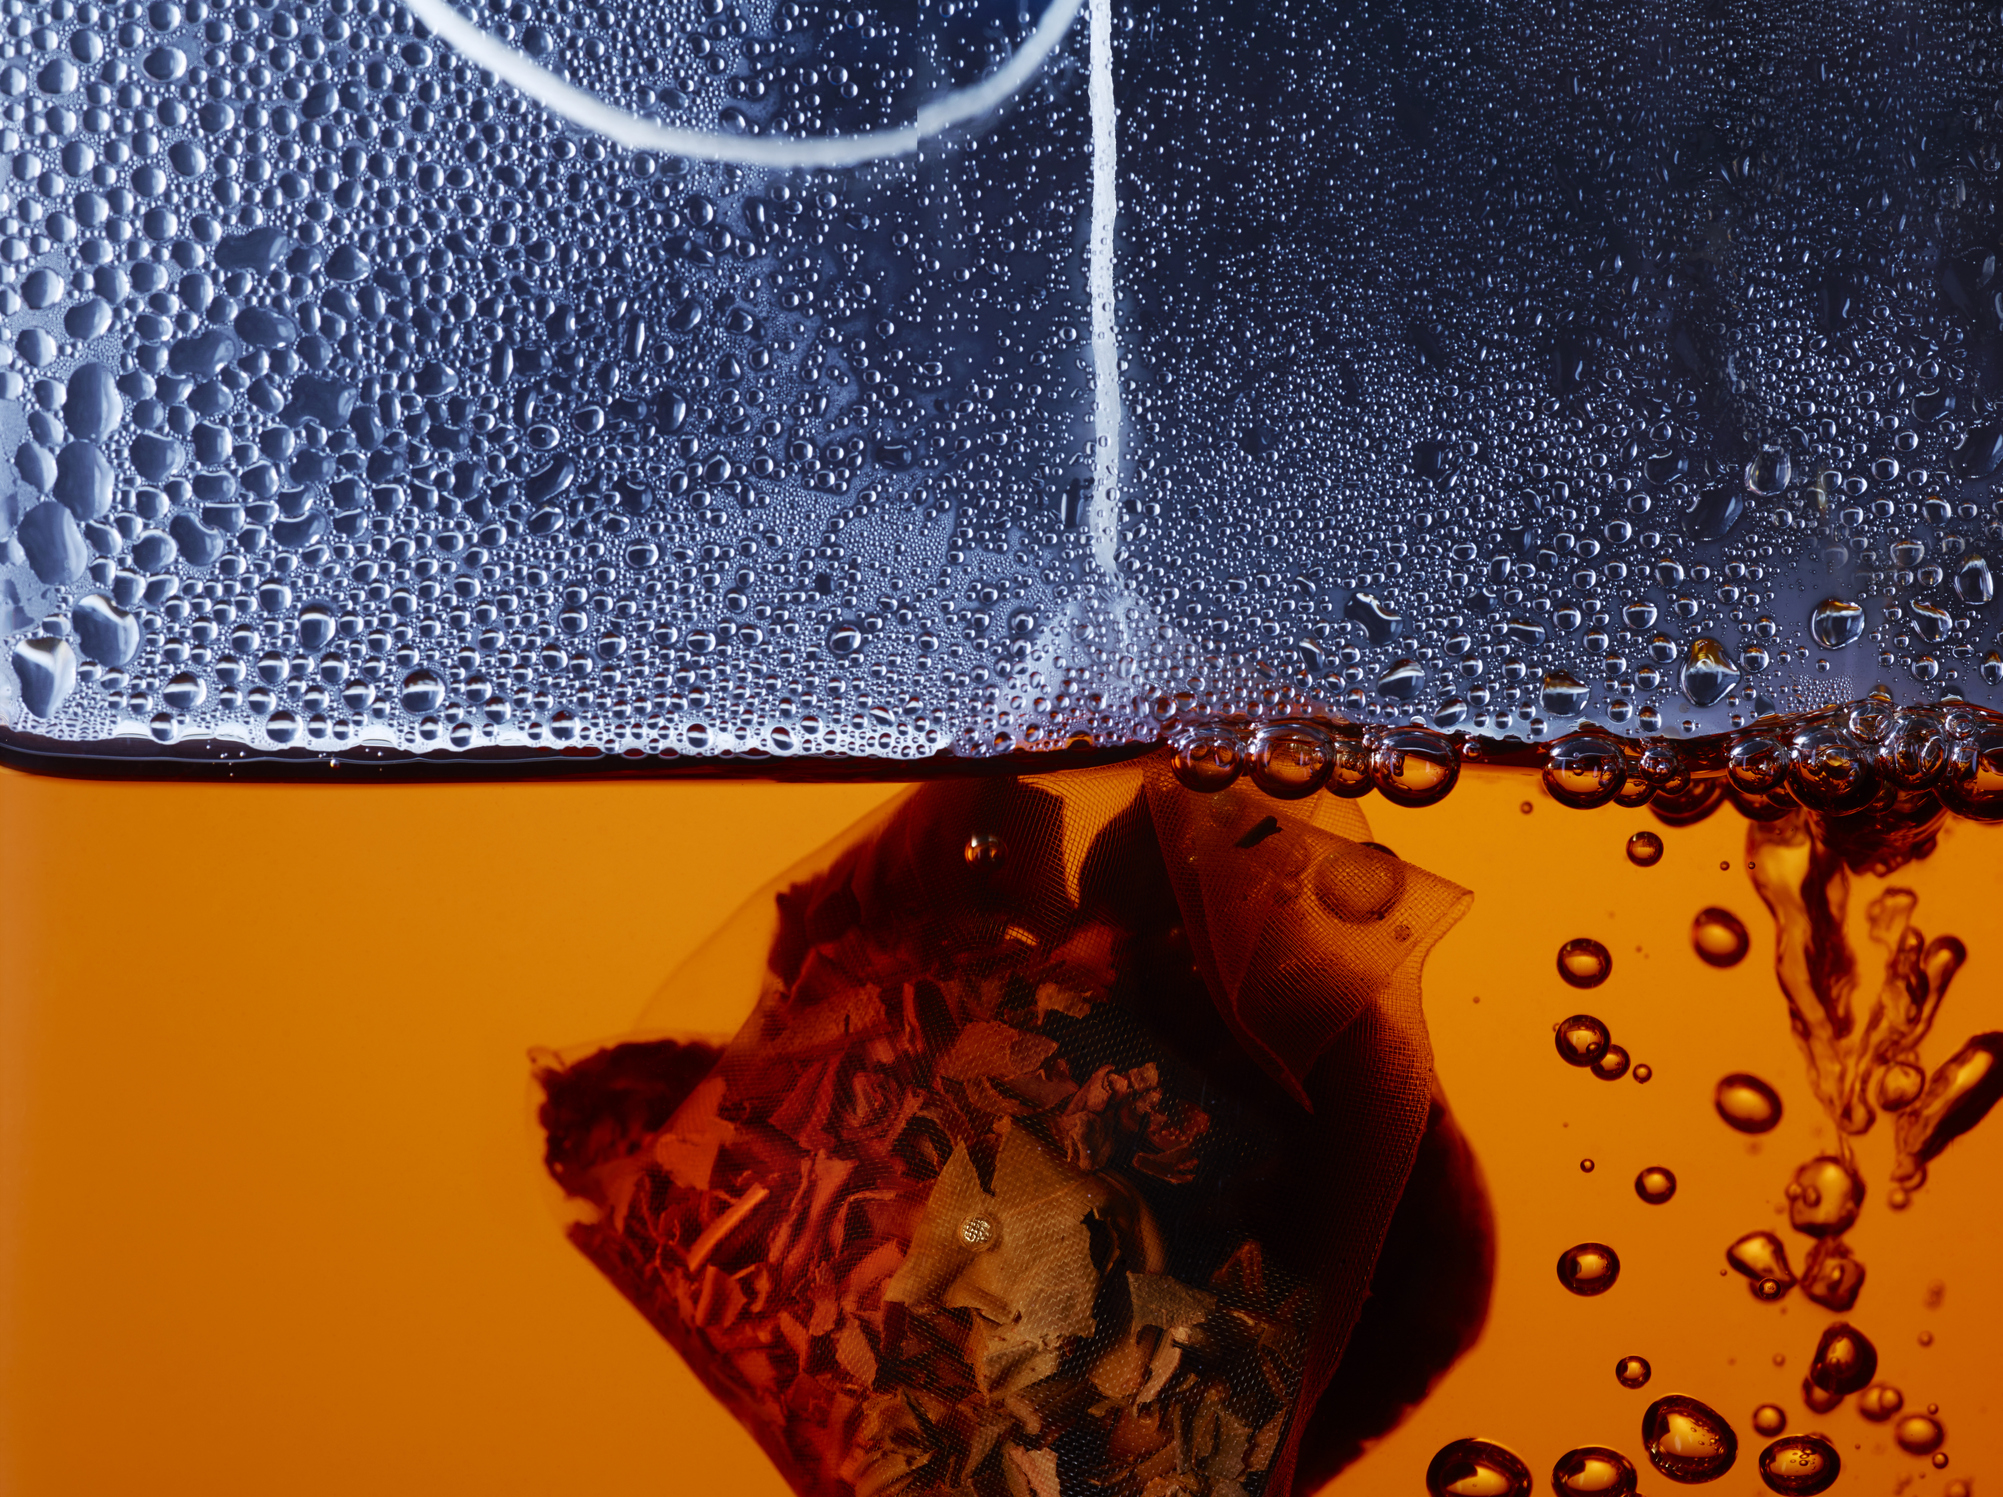 A close-up shot of a tea bag steeping in a transparent mug, with condensation forming on the cup’s side.